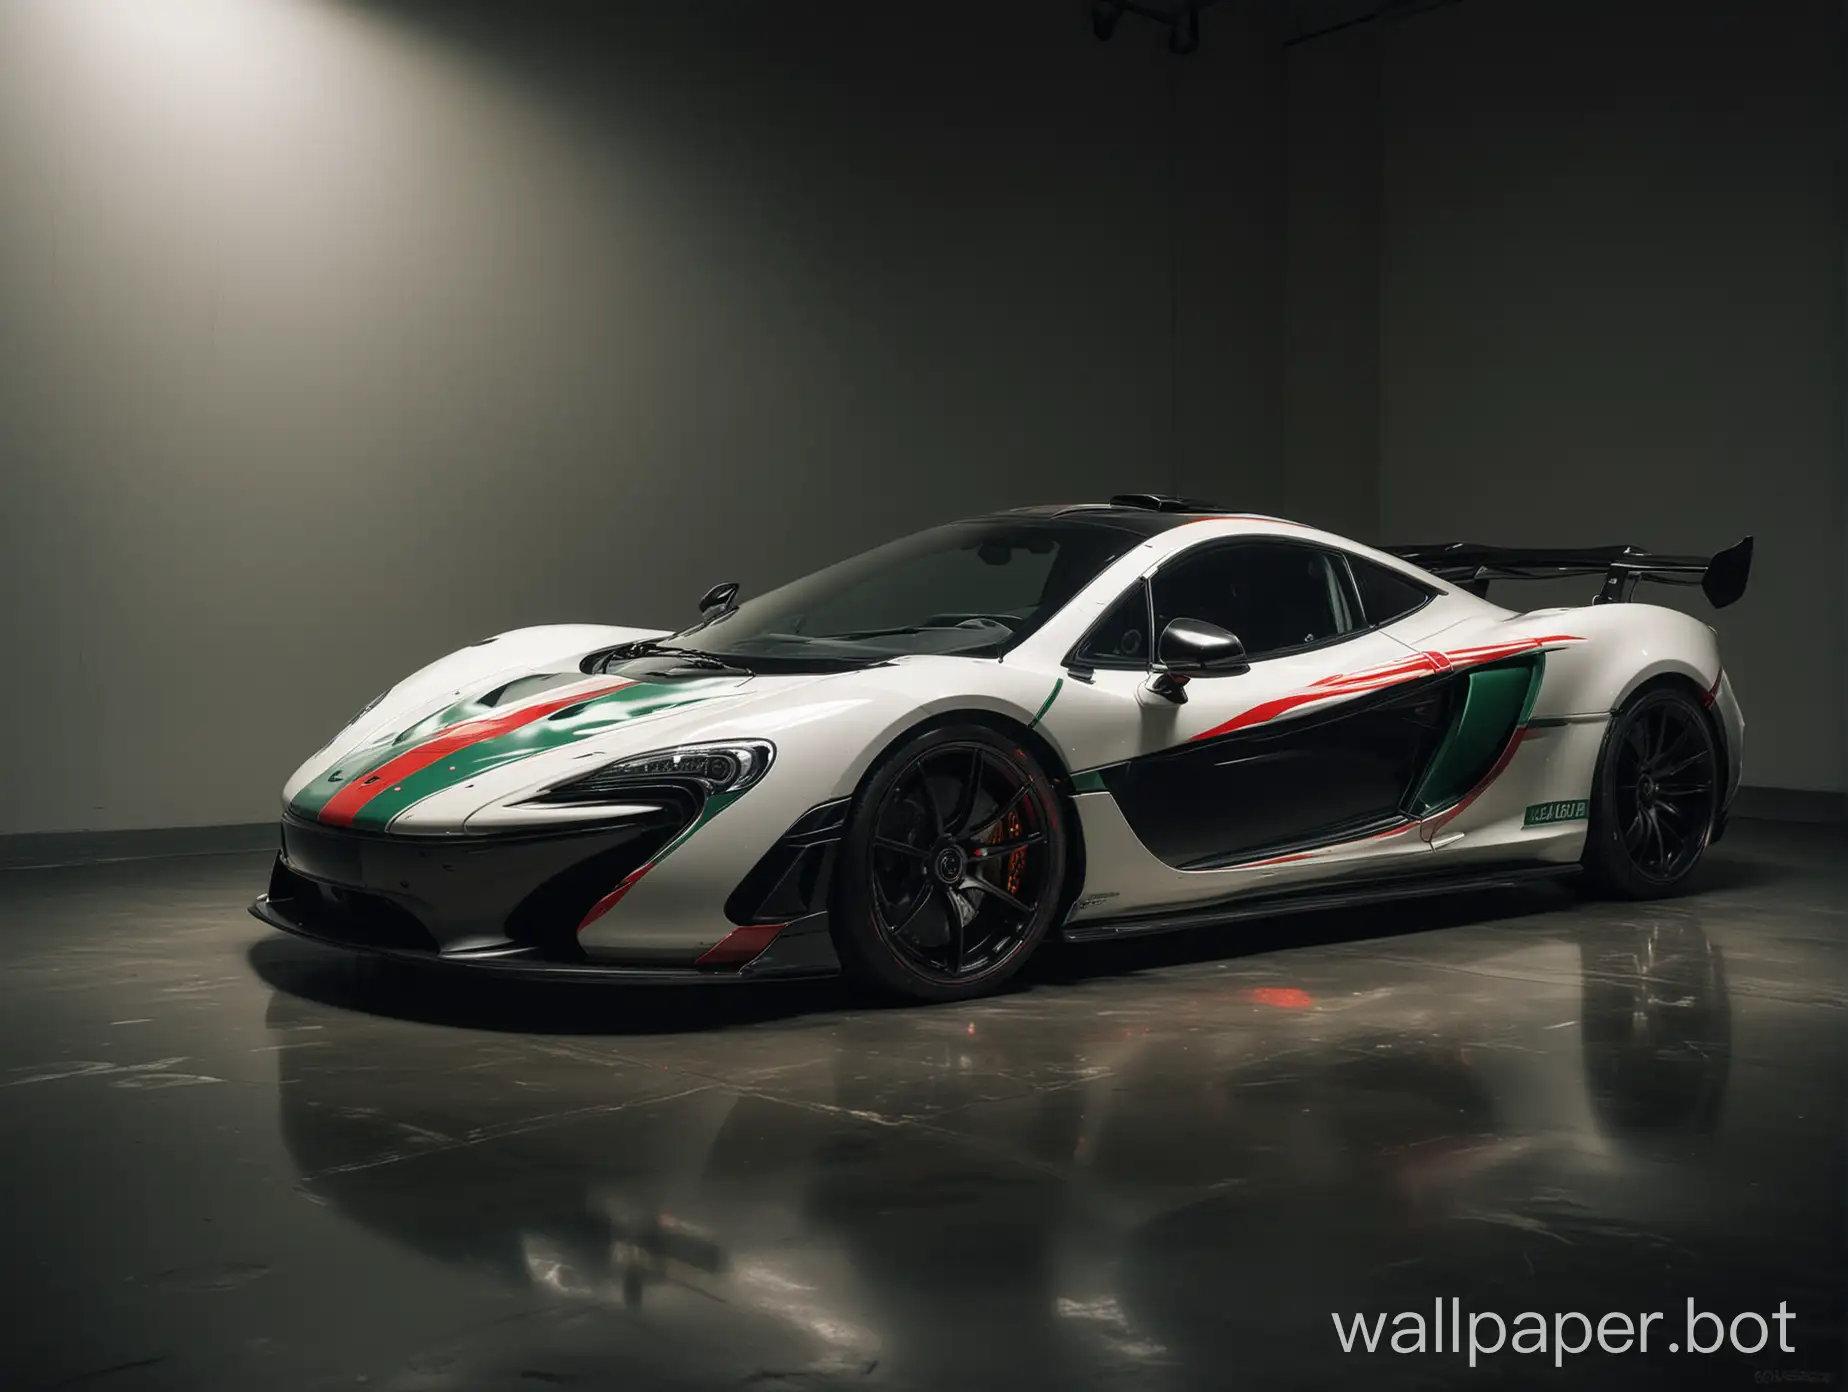 white McLaren P11 with green and red stripes in a dark room with faint light